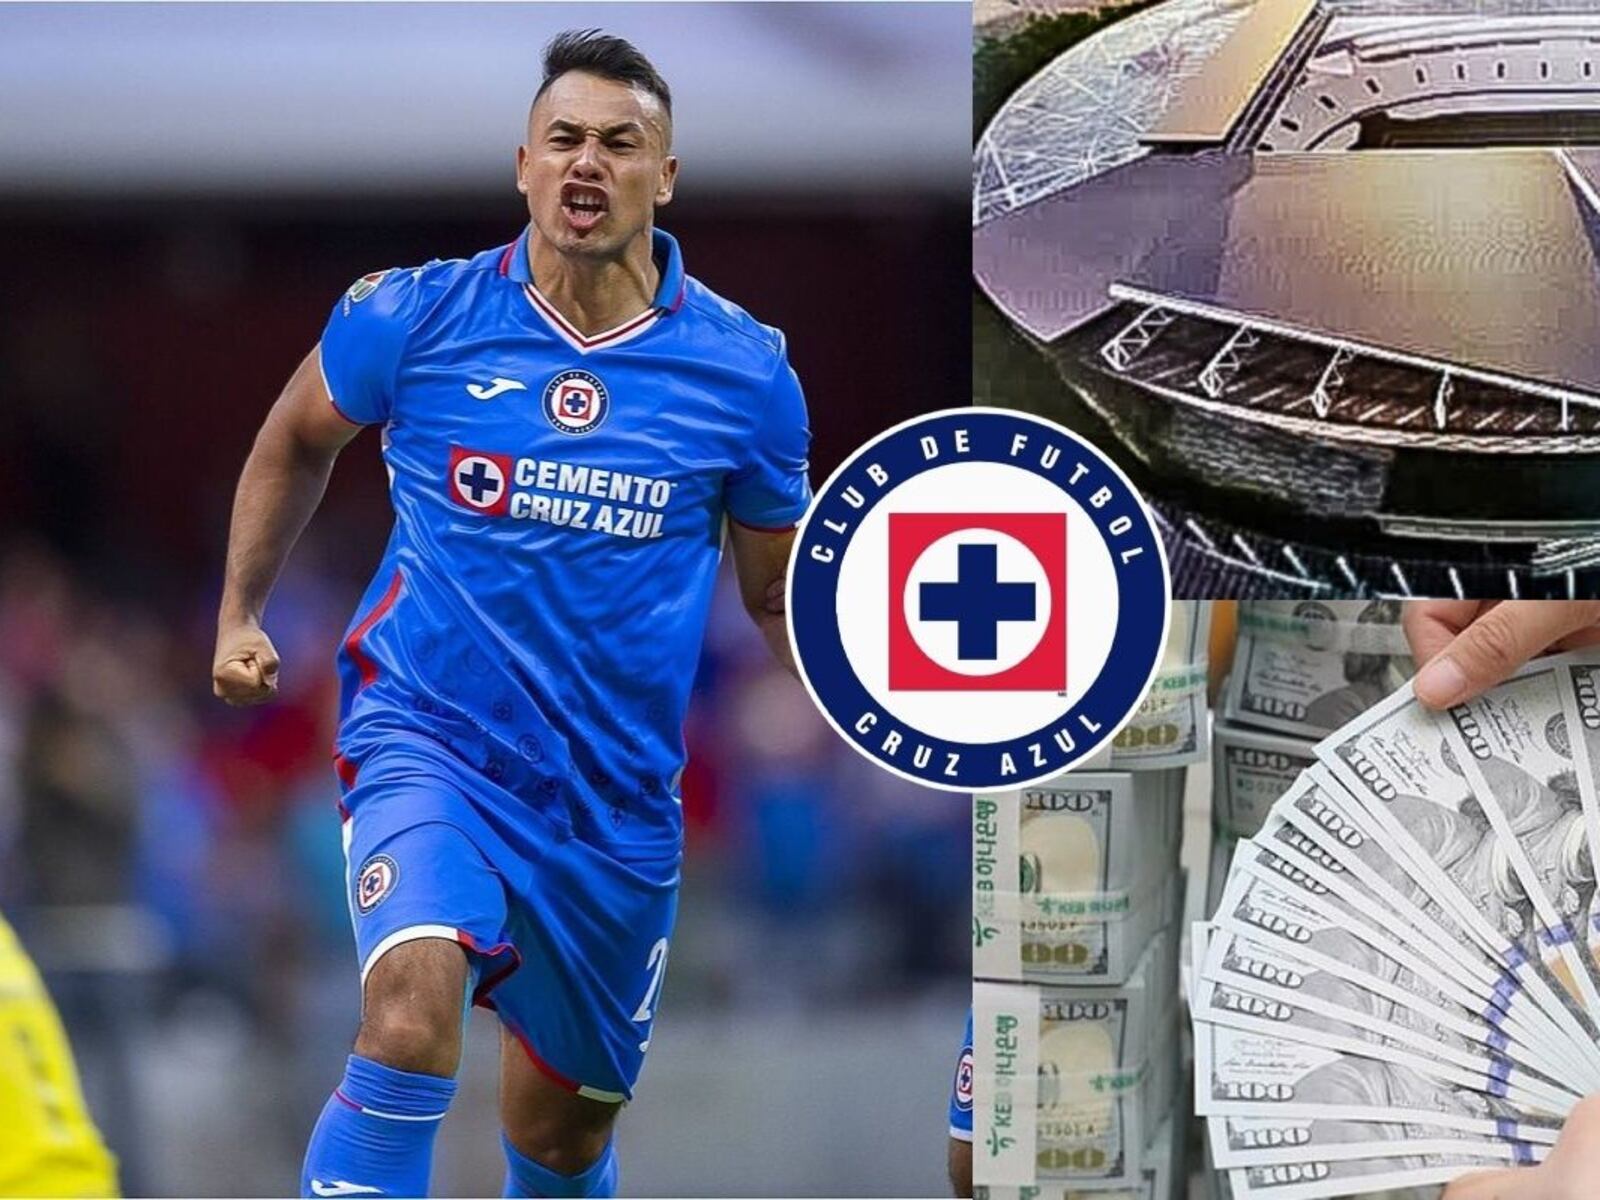 The millionaire who could buy Cruz Azul and build their new stadium